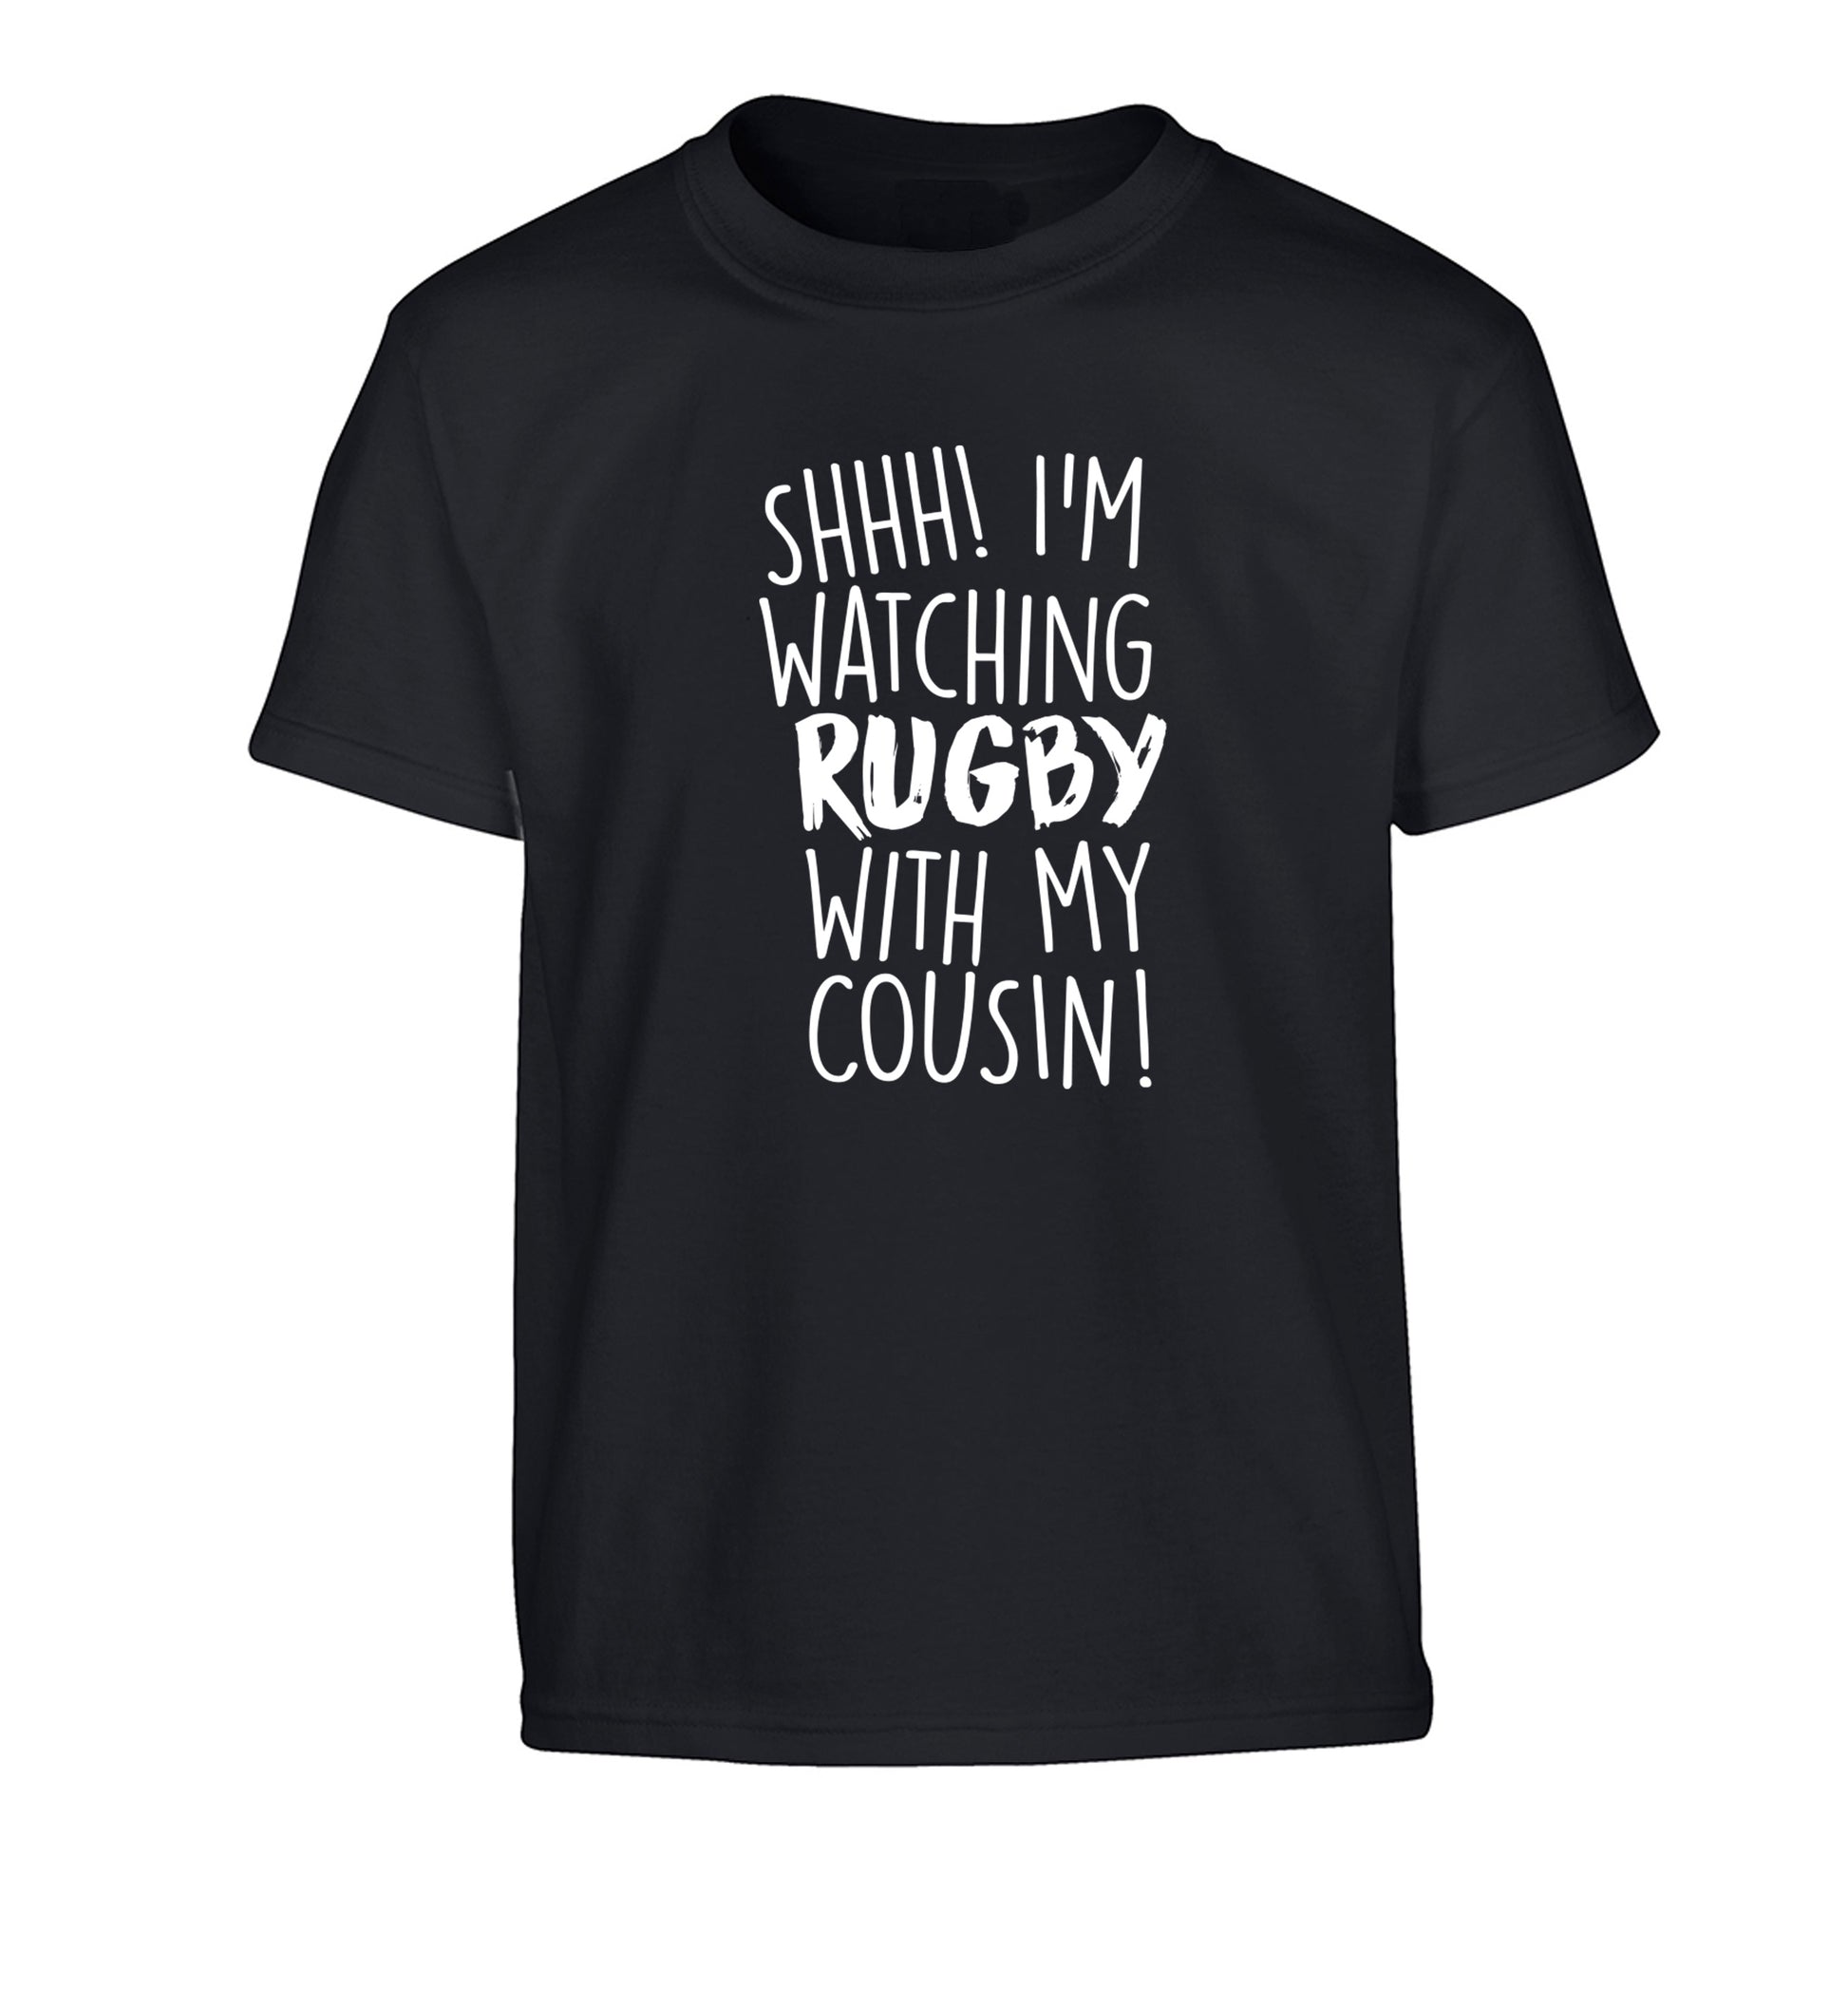 Shhh I'm watching rugby with my cousin Children's black Tshirt 12-13 Years